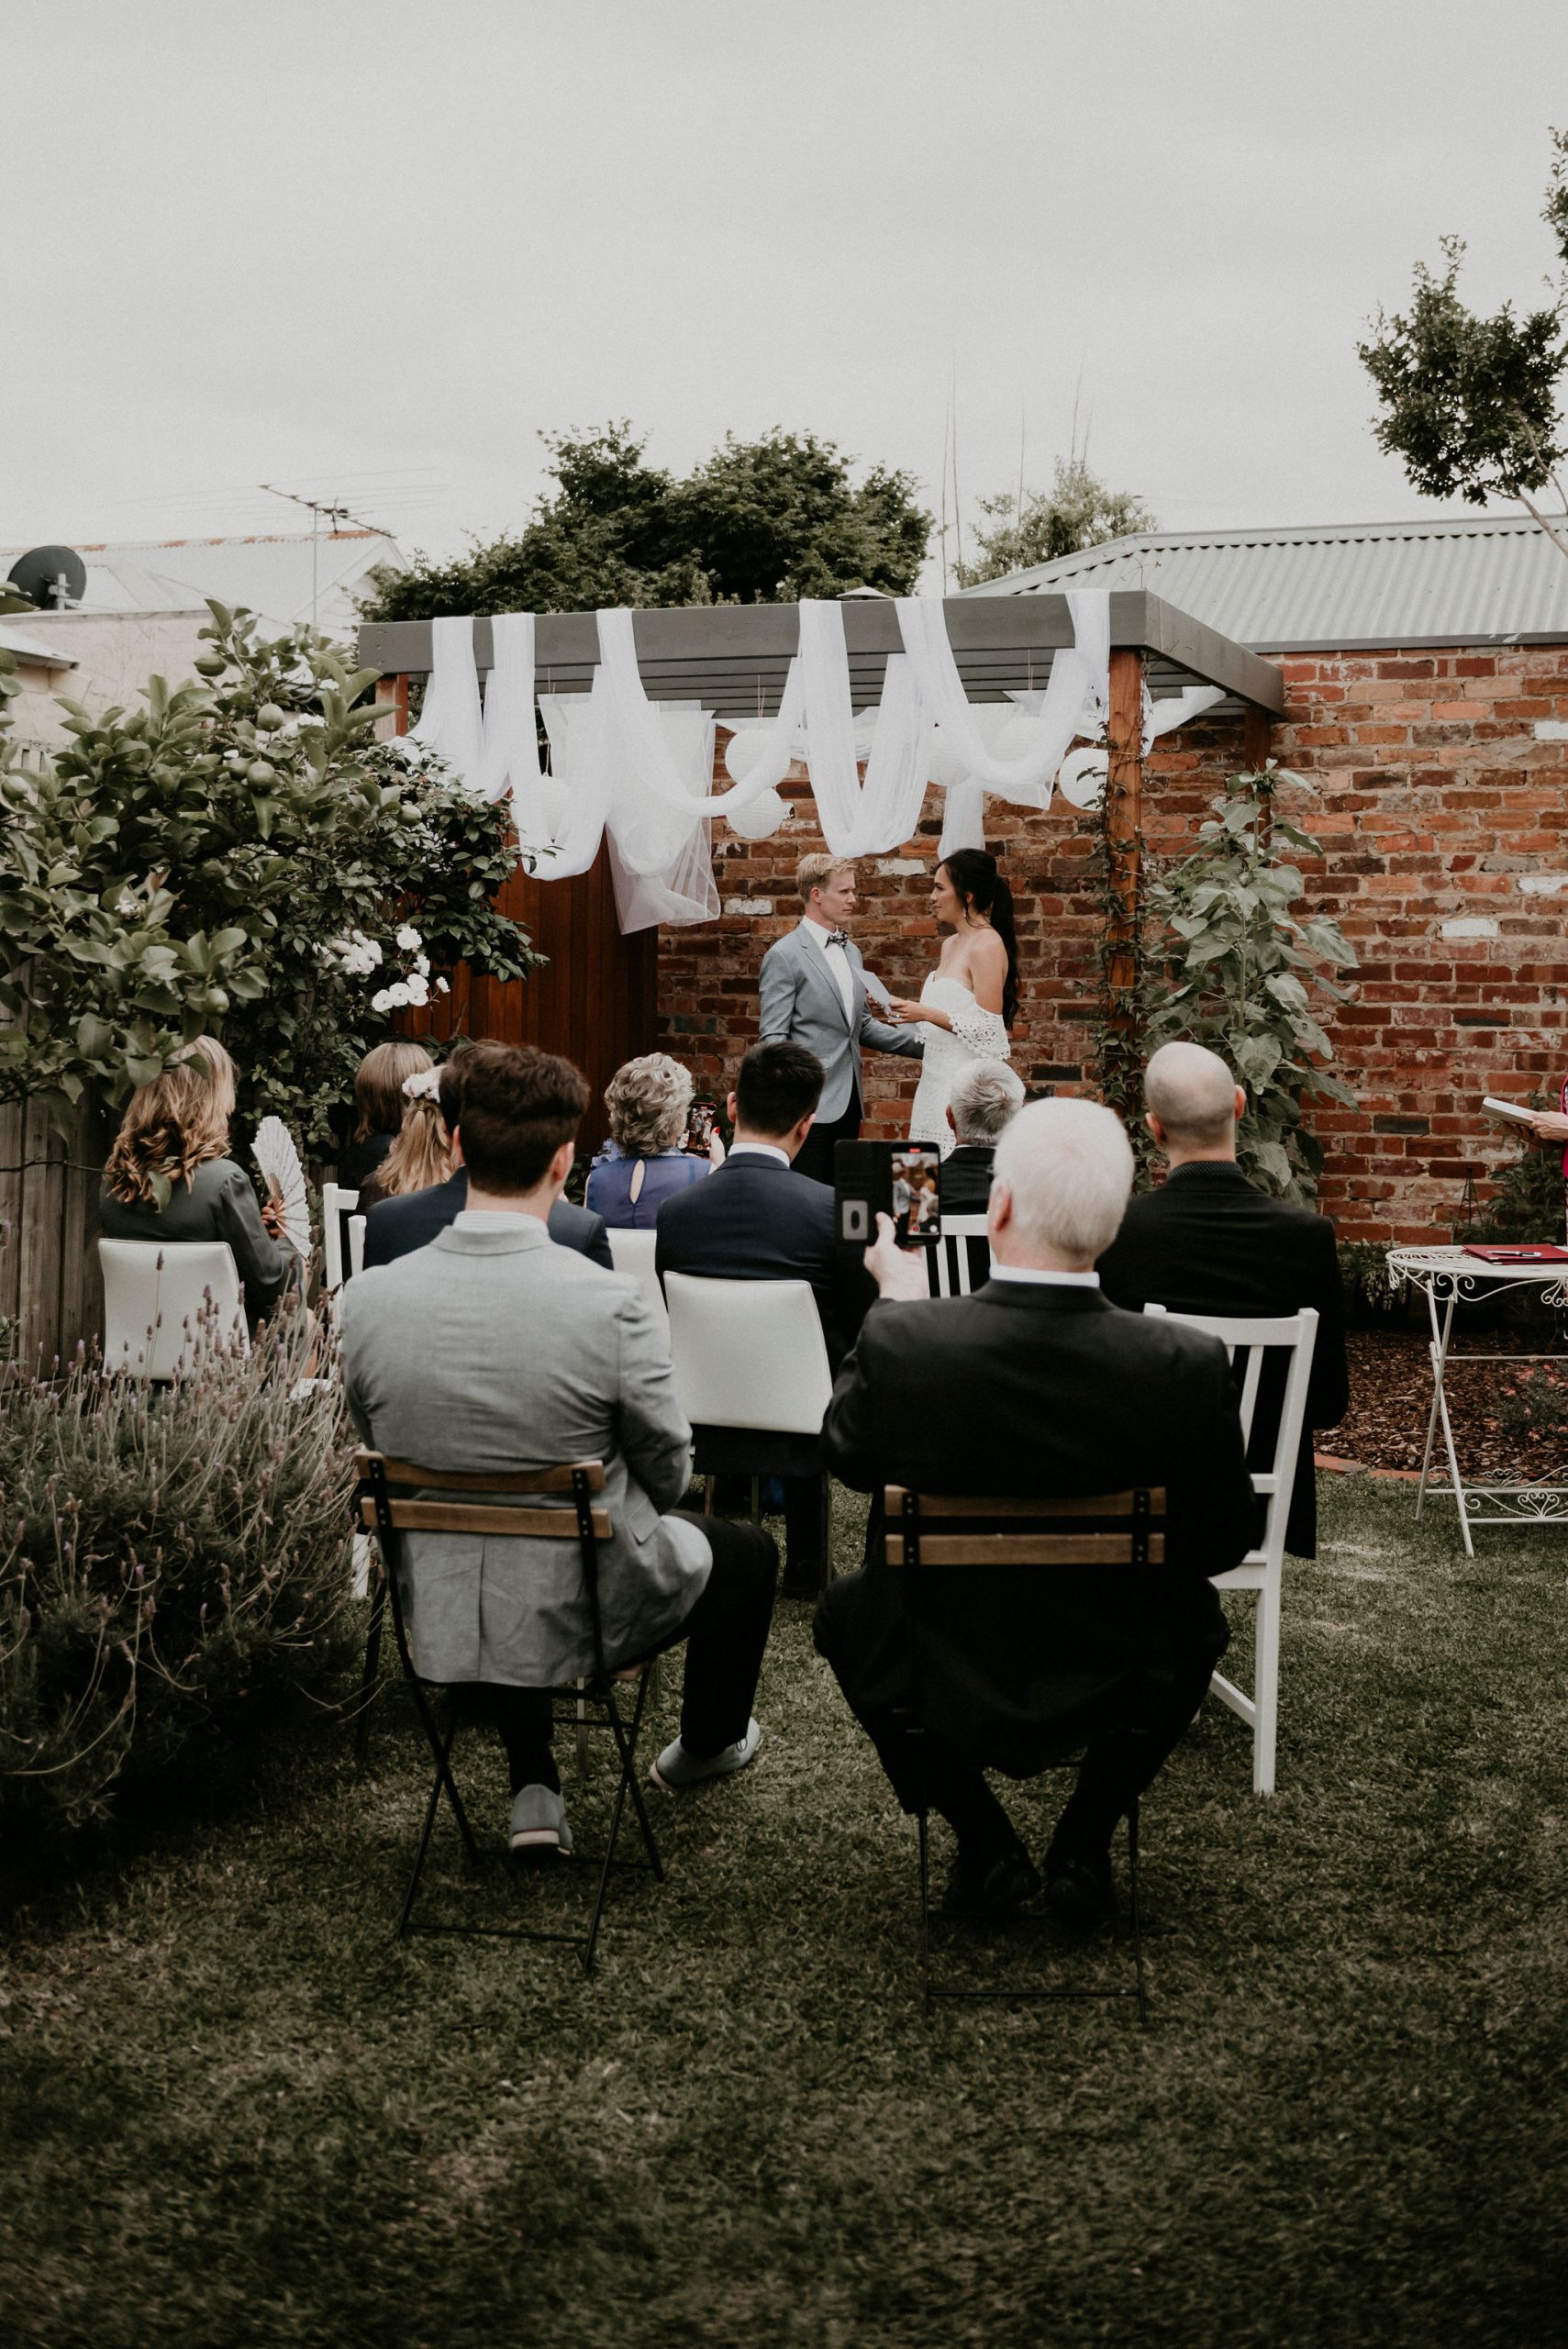 Lets-Elope-Melbourne-Celebrant-Photographer-Elopement-Package-Victoria-Sarah-Matler-Photography-Elope-at-Home-Footscray-weddings-intimate-6